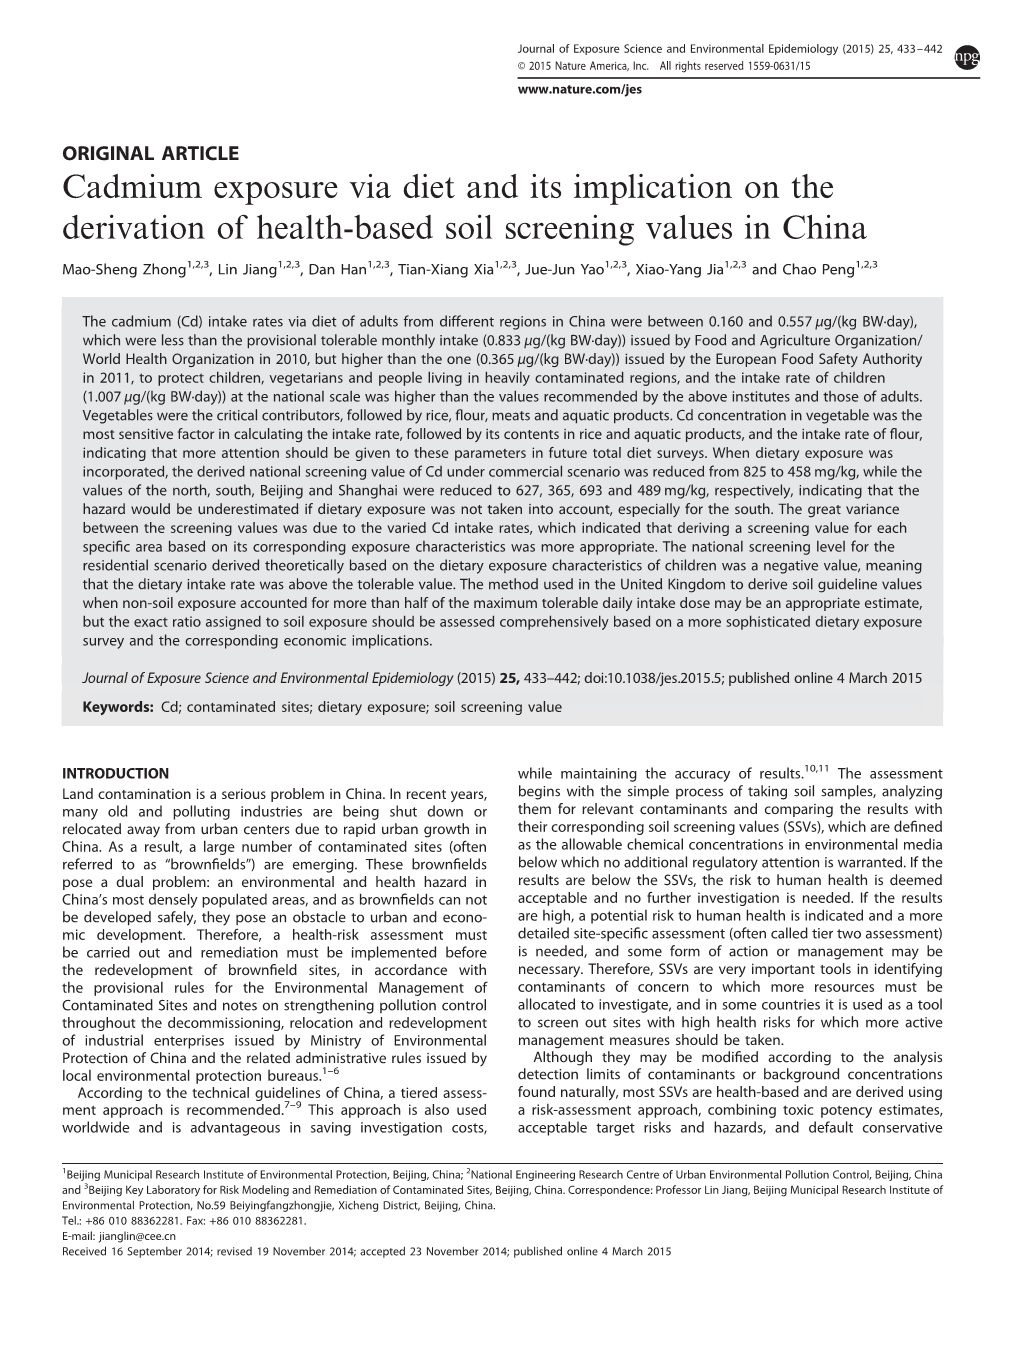 Cadmium Exposure Via Diet and Its Implication on the Derivation of Health-Based Soil Screening Values in China